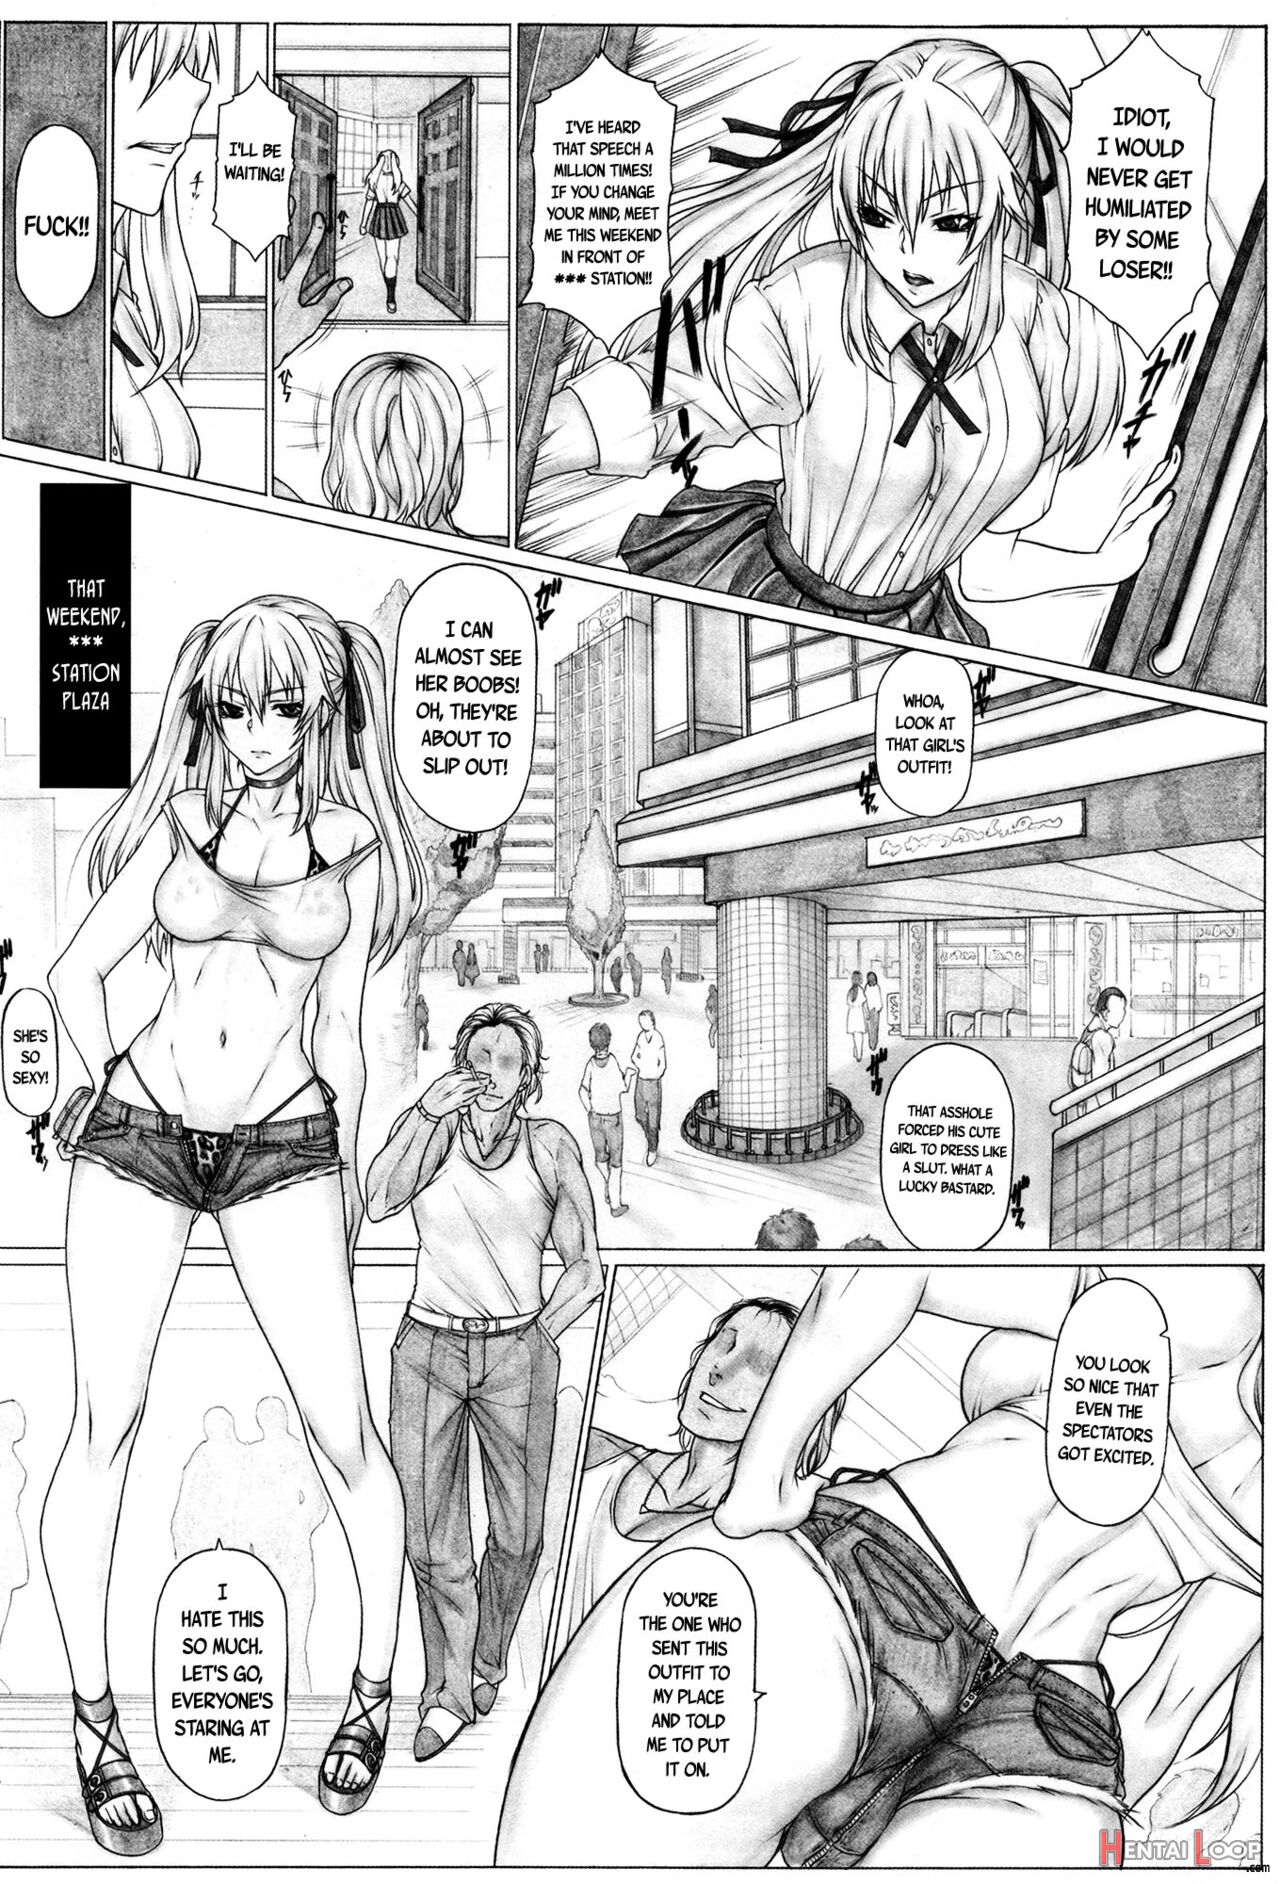 Angel’s Stroke 142 Hamegurui 5th Shot Sex Showdown About Cumming 5 Times With Just One Condom And There’s 50 Million Yen On The Line page 5